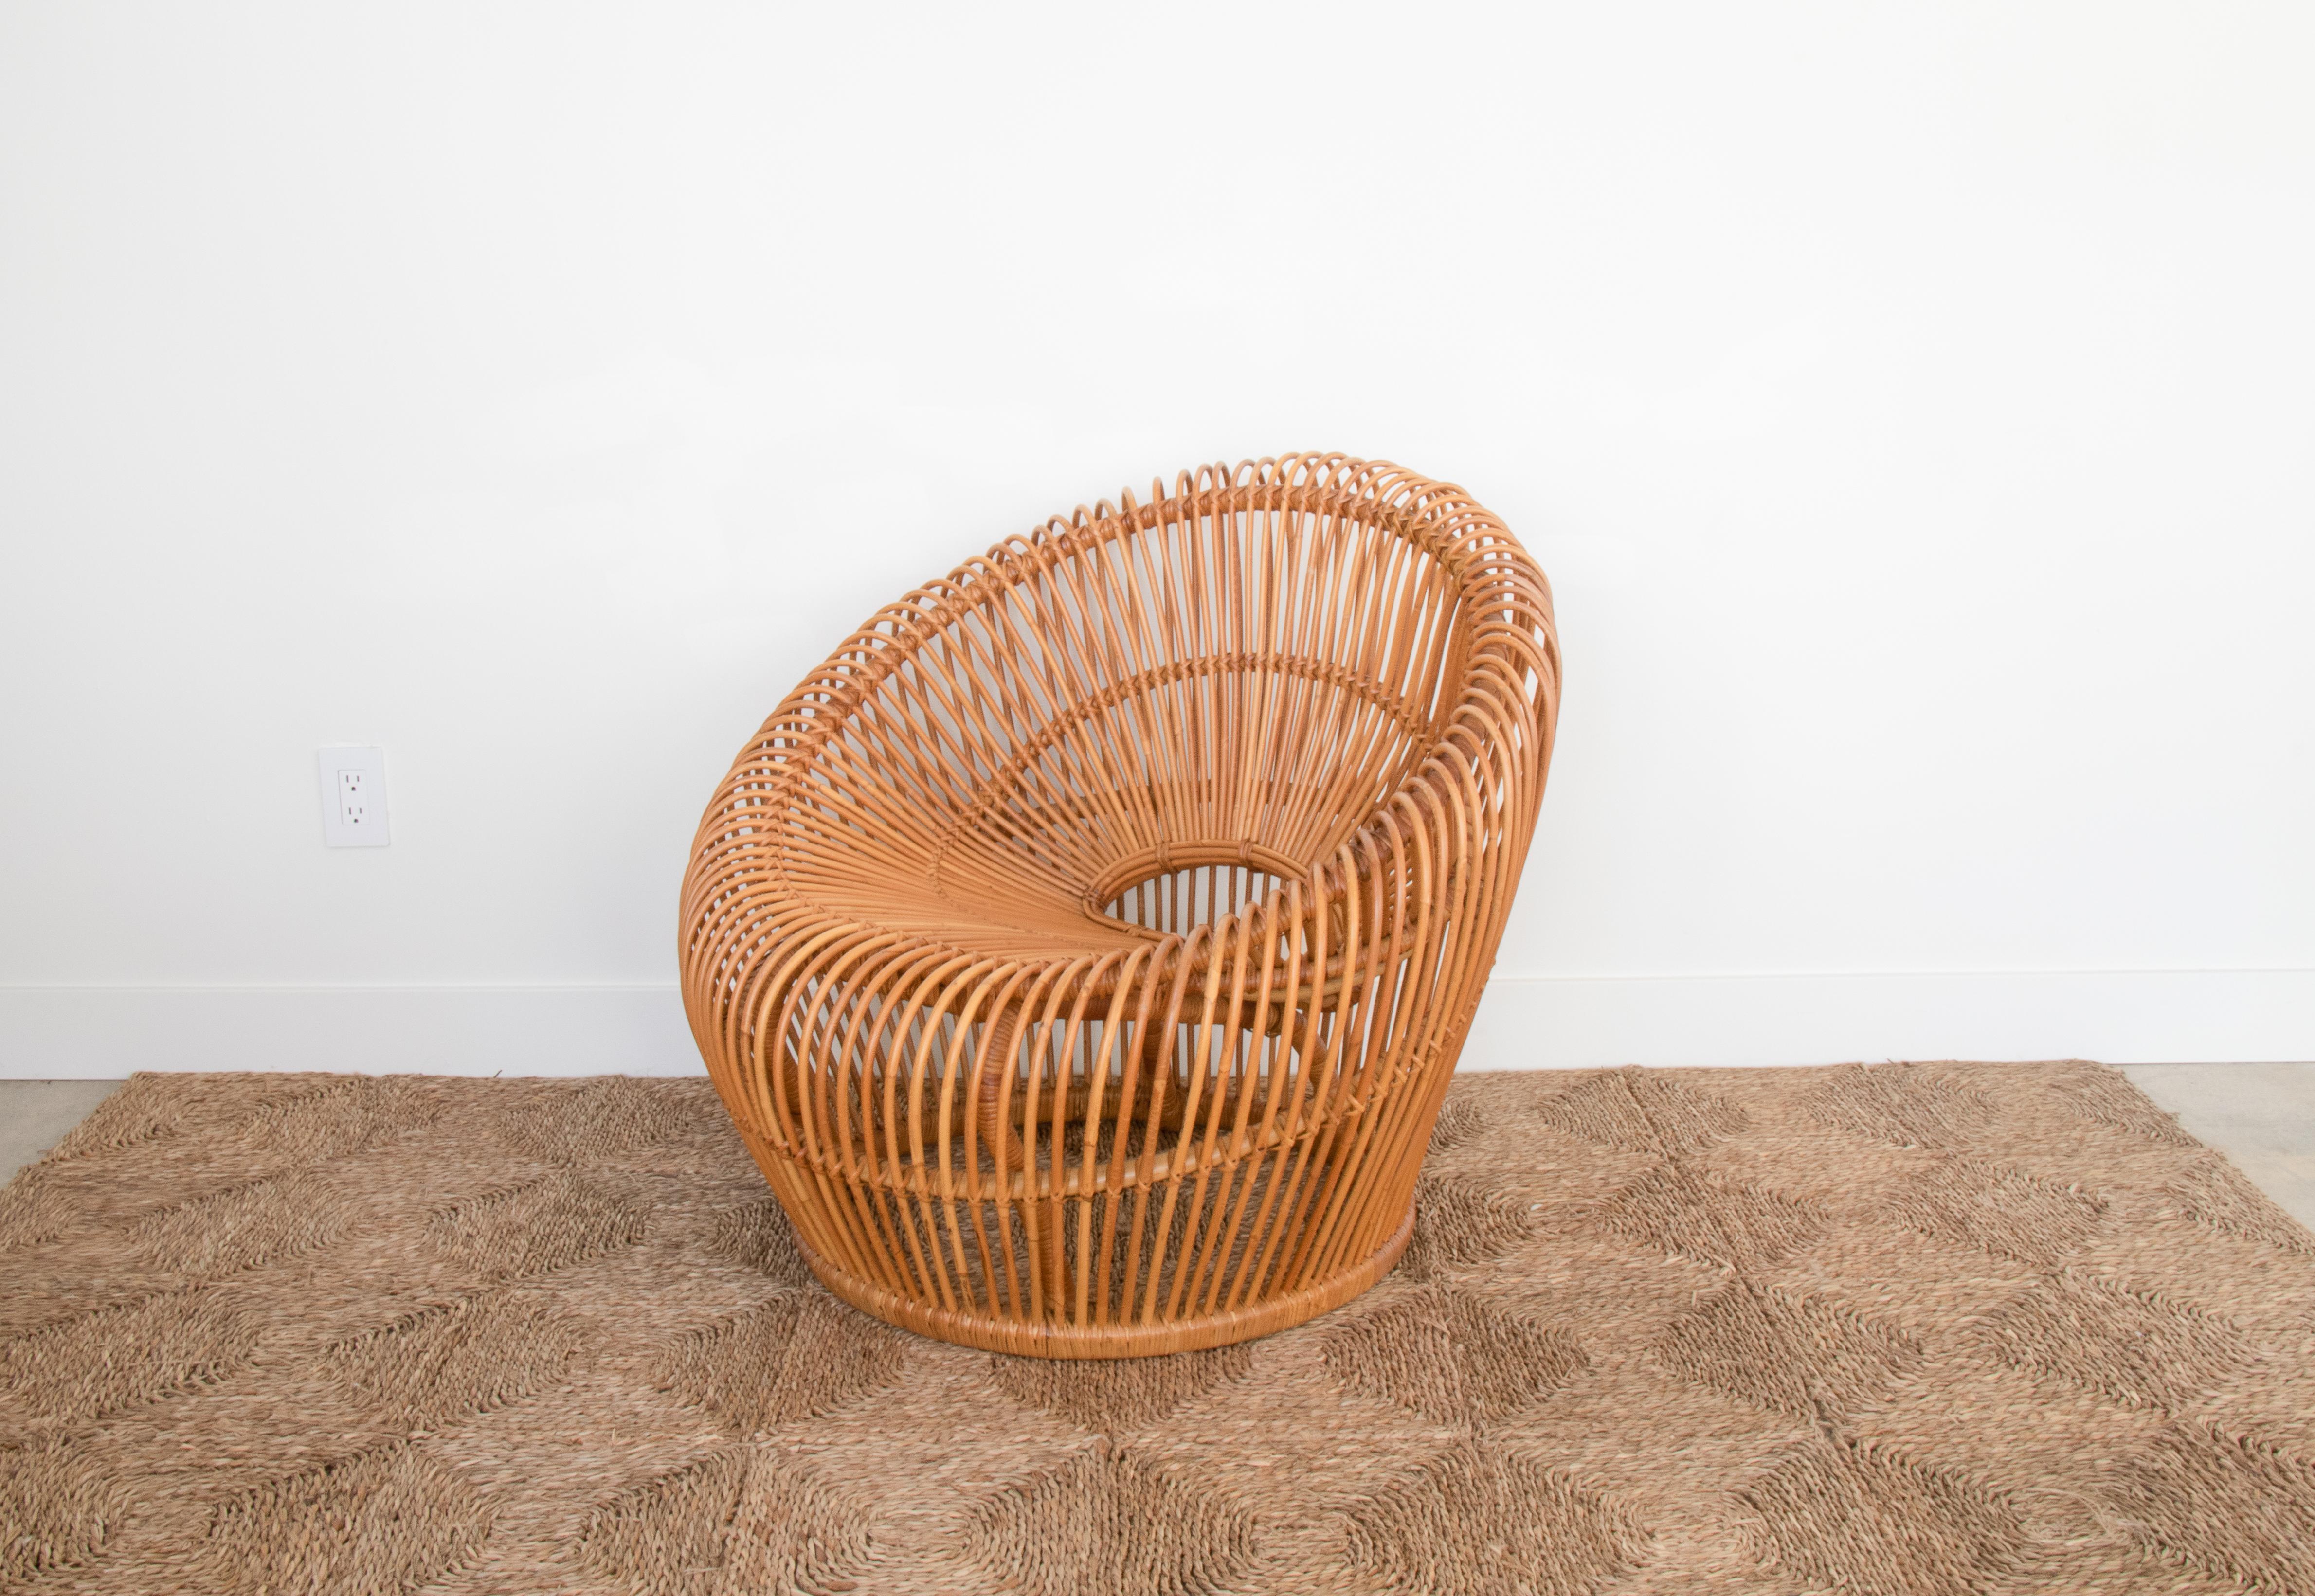 Large rattan bucket chair in the style of Franco Albini. Curved rattan with small open back and deep seat, making the chair very comfortable. Beautiful statement chair.